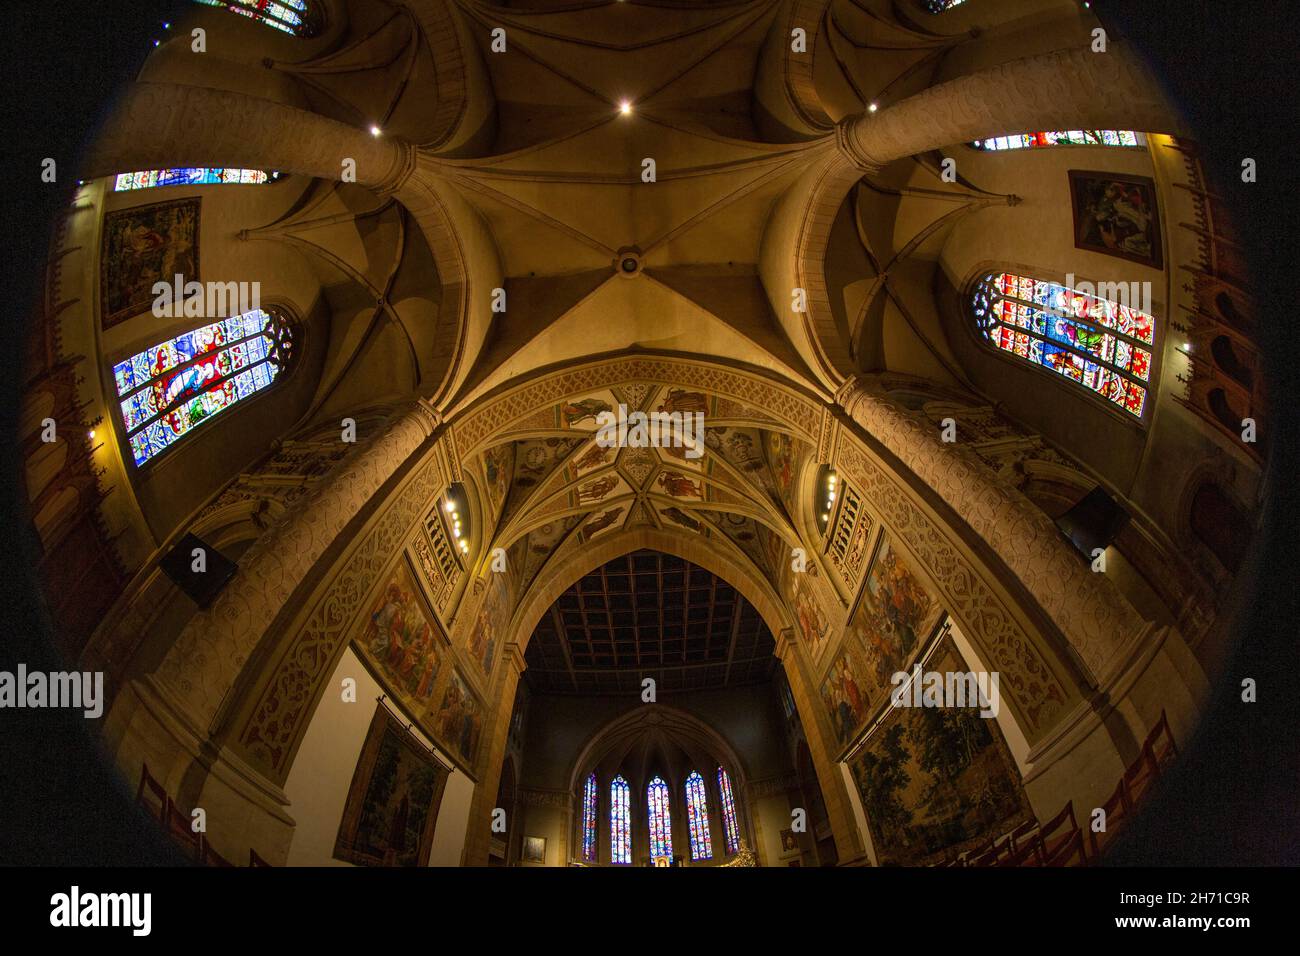 Inside view of the Cathedral of Notre Dame. Luxembourg City, Luxembourg. Stock Photo